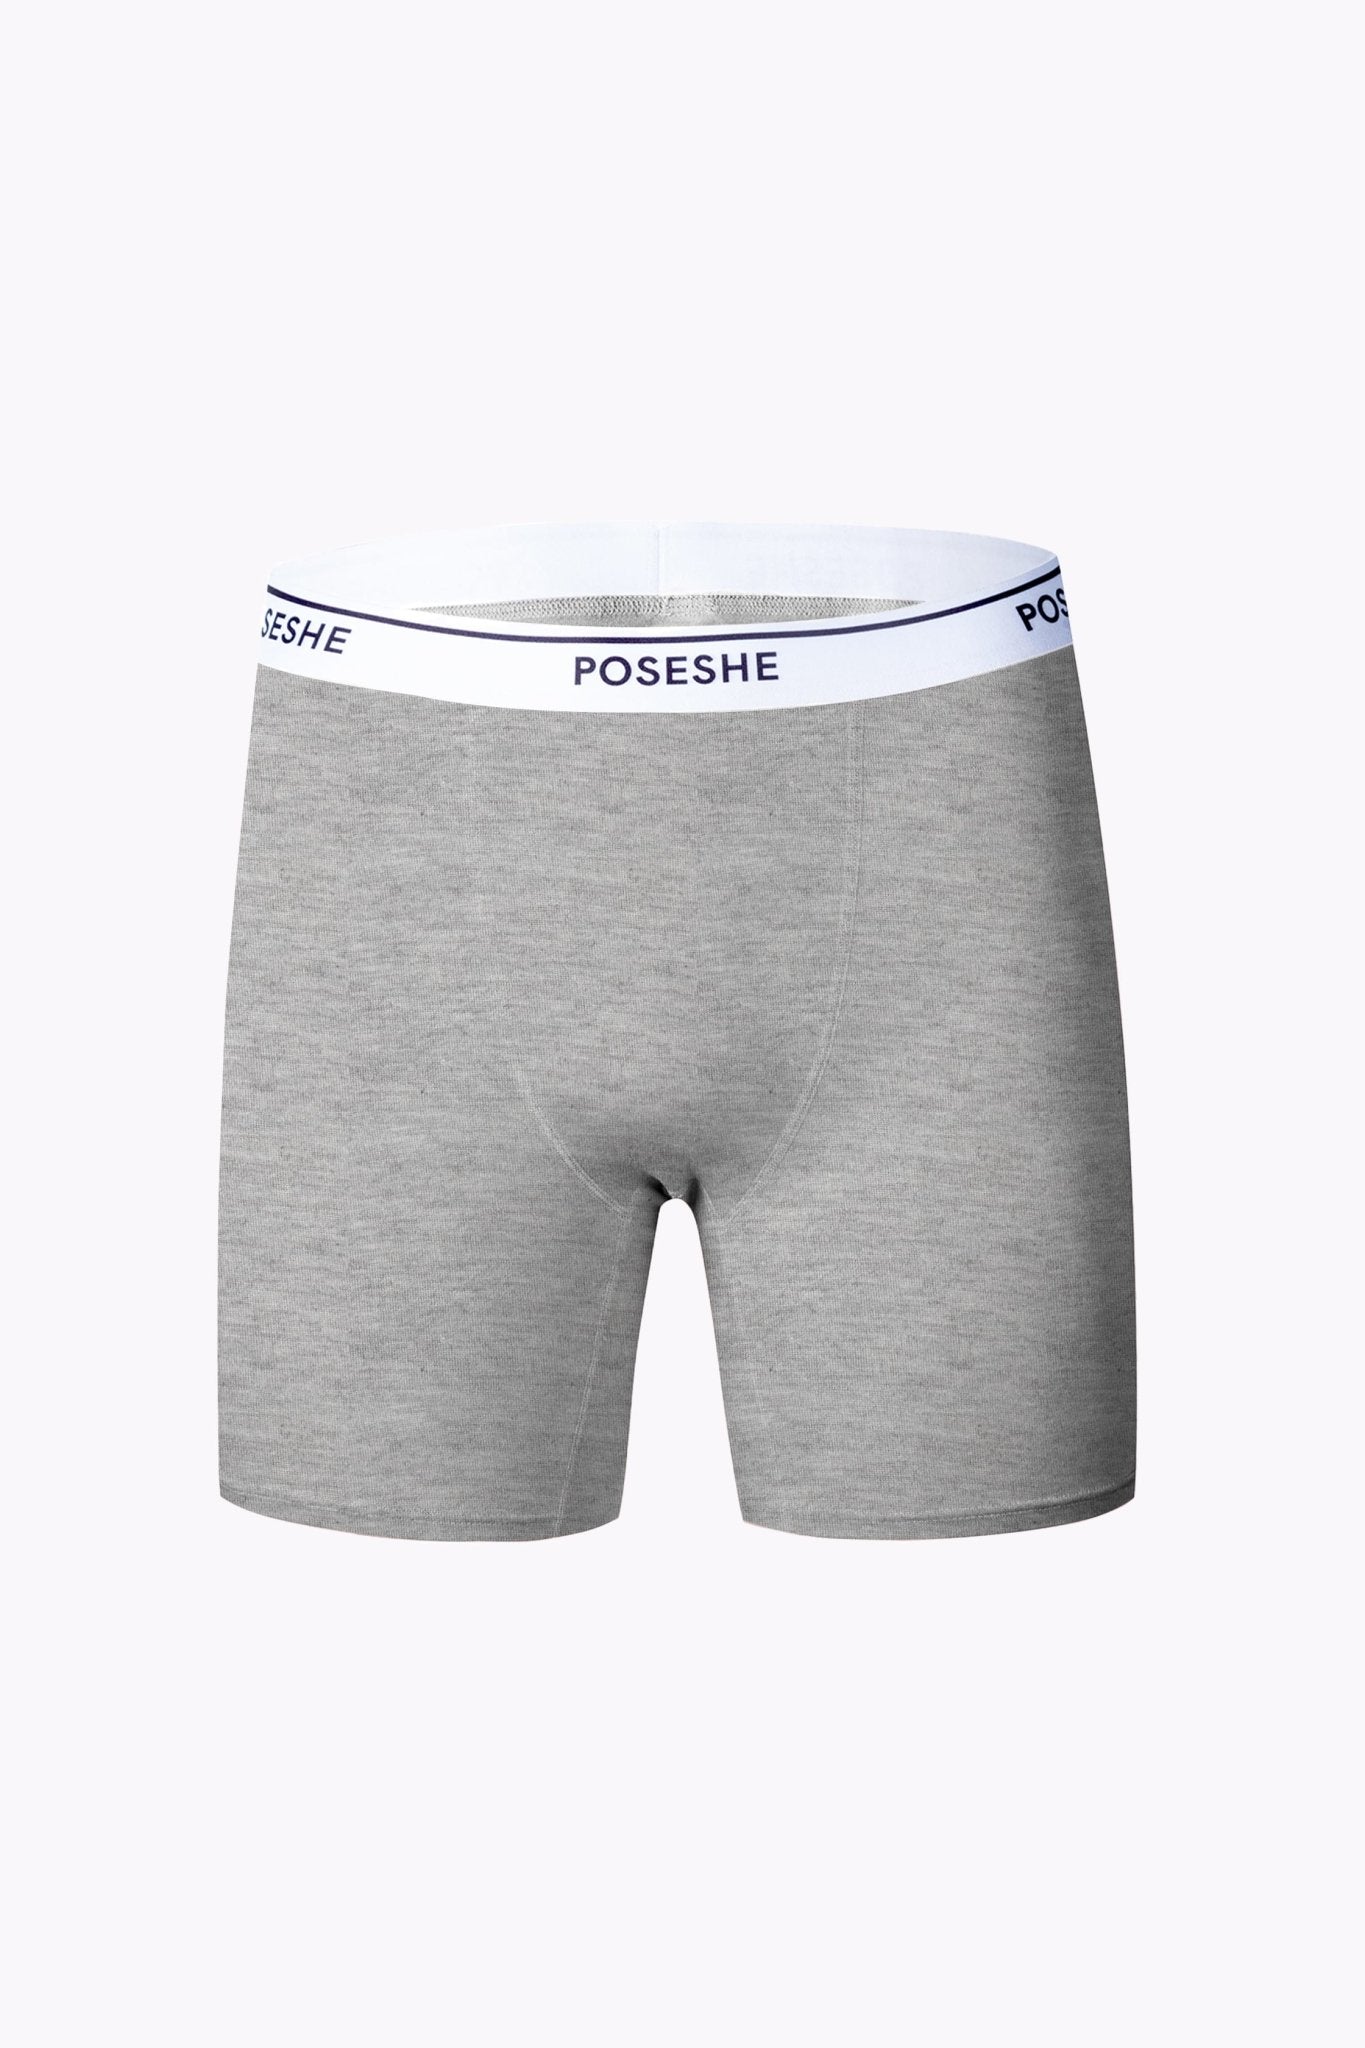 http://poseshe.com/cdn/shop/products/Women-boxers-underwear-high-waisted-6inseam-3pack-1.jpg?v=1693906357&width=2048